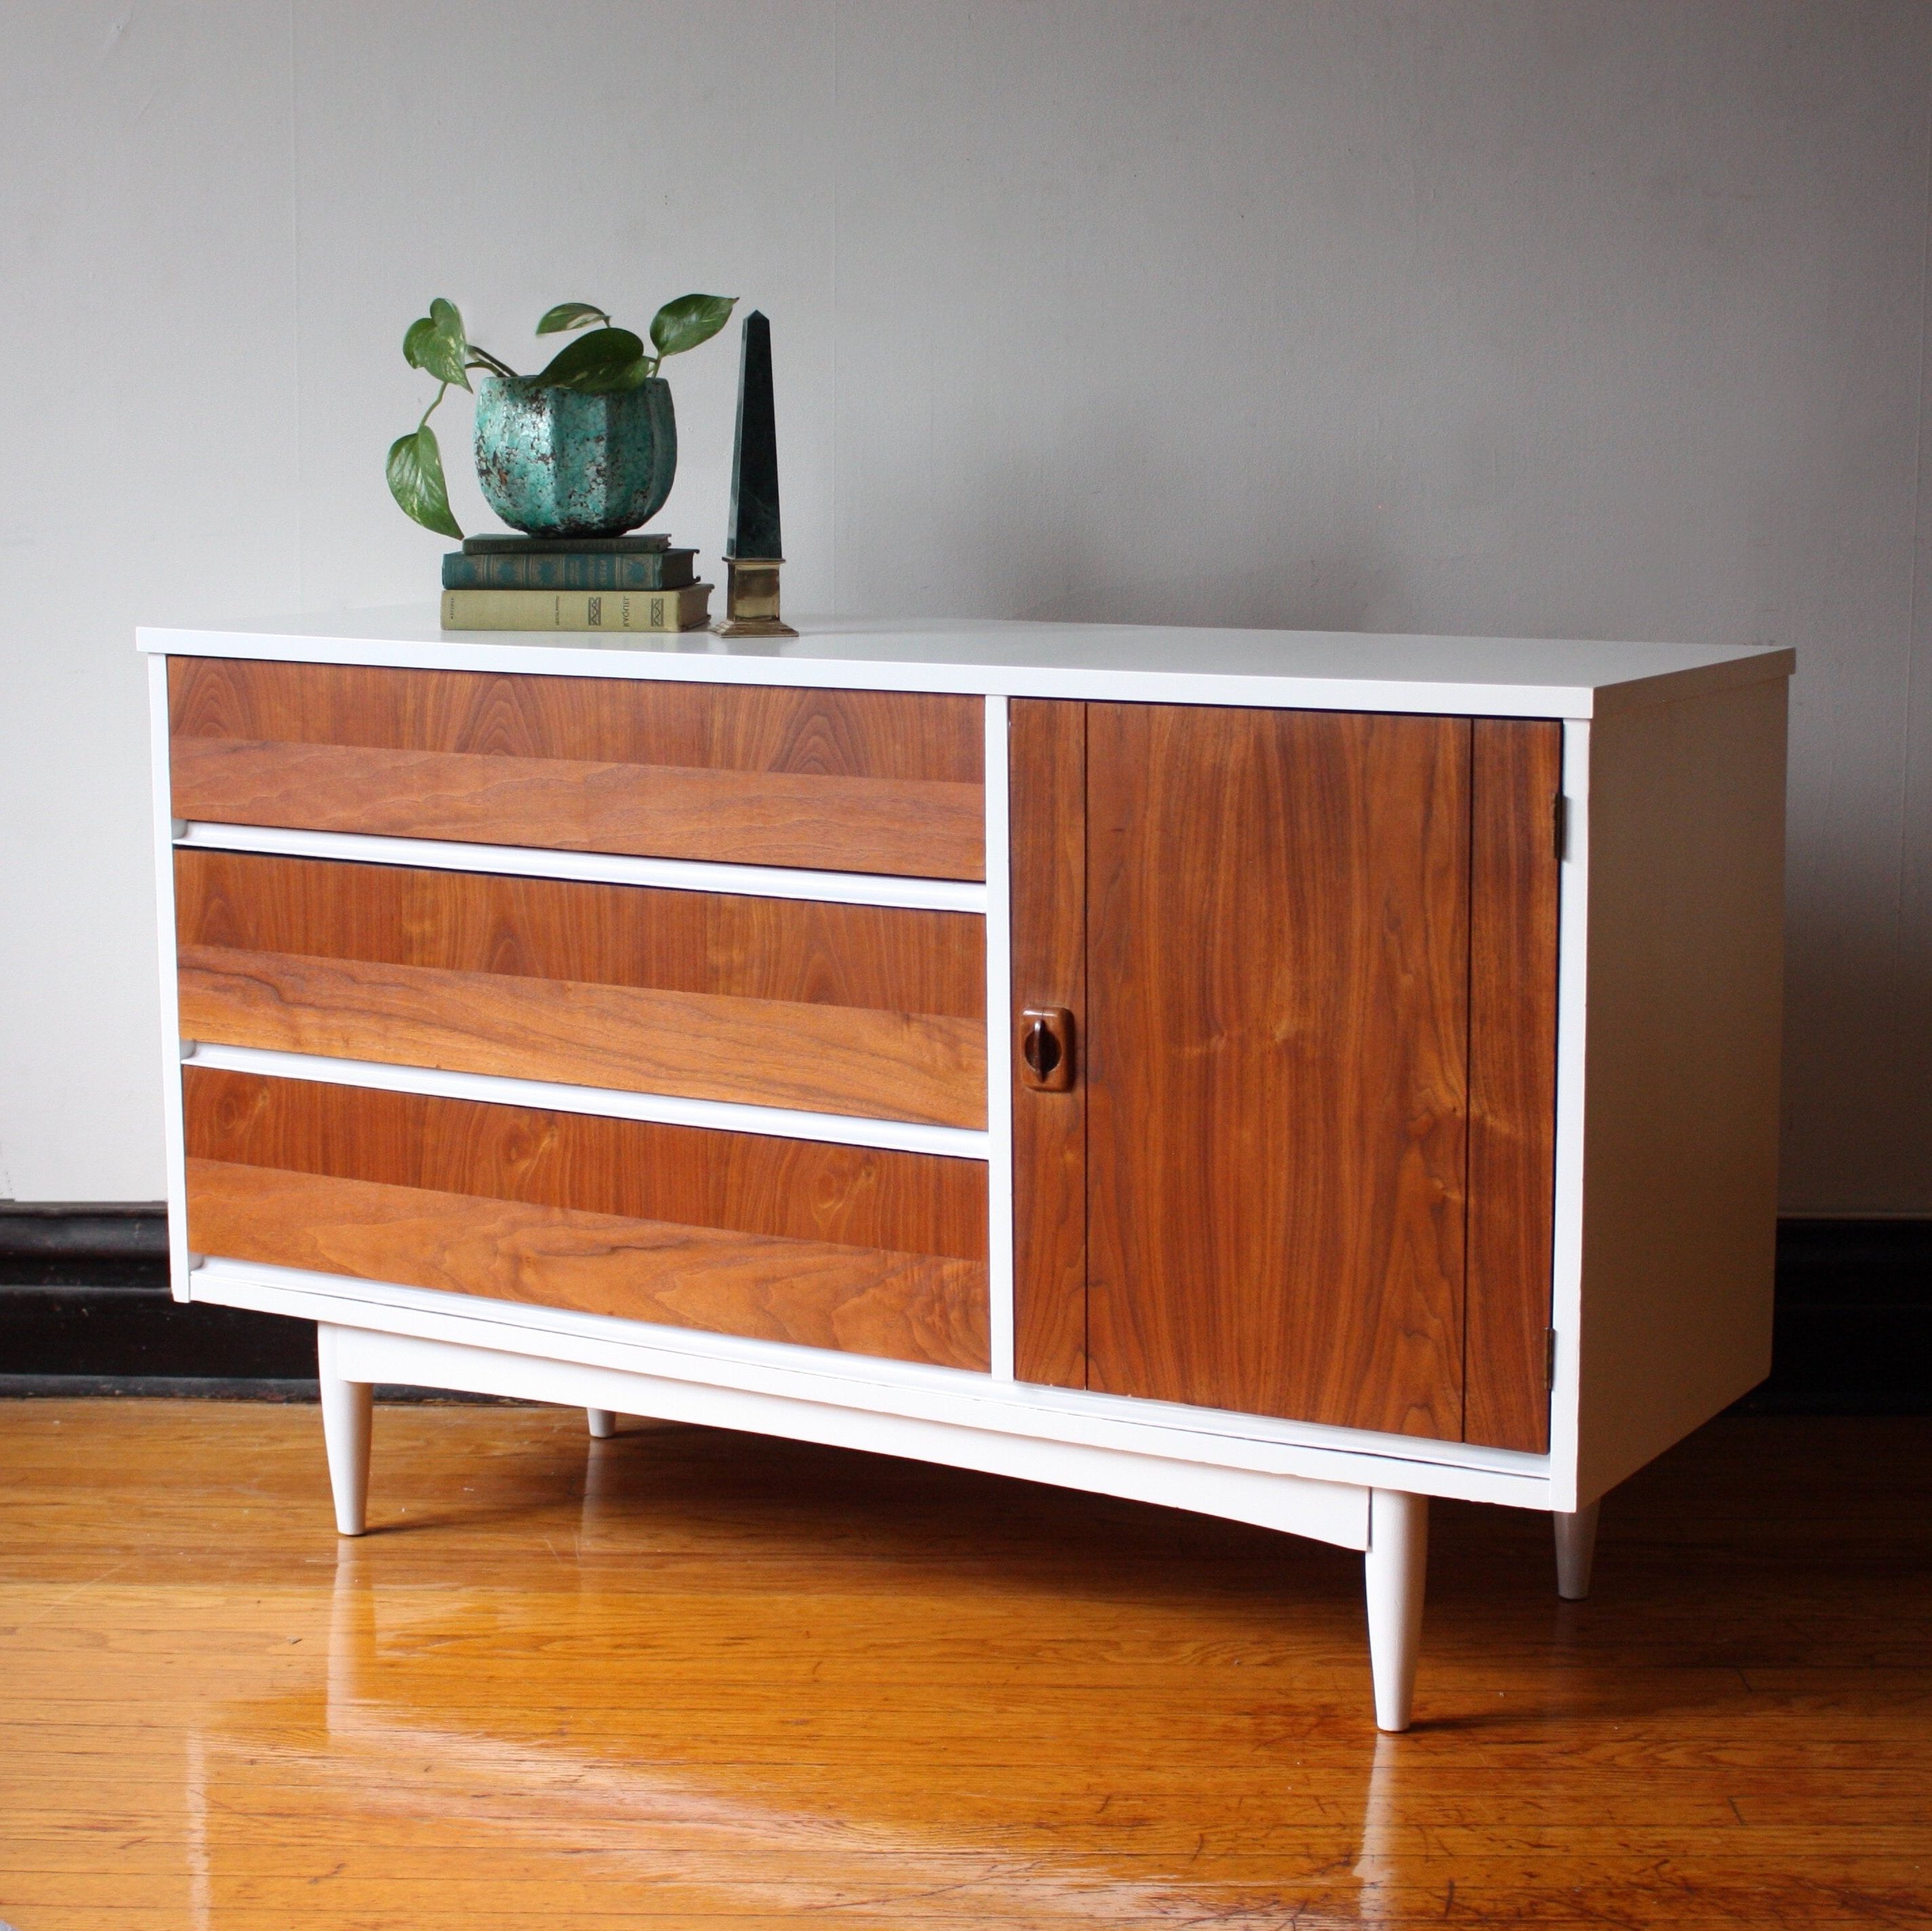 Soldwhite And Wood Mid Century Modern Credenza//mcm Media – Etsy In Mid Century Modern White Sideboards (View 8 of 20)